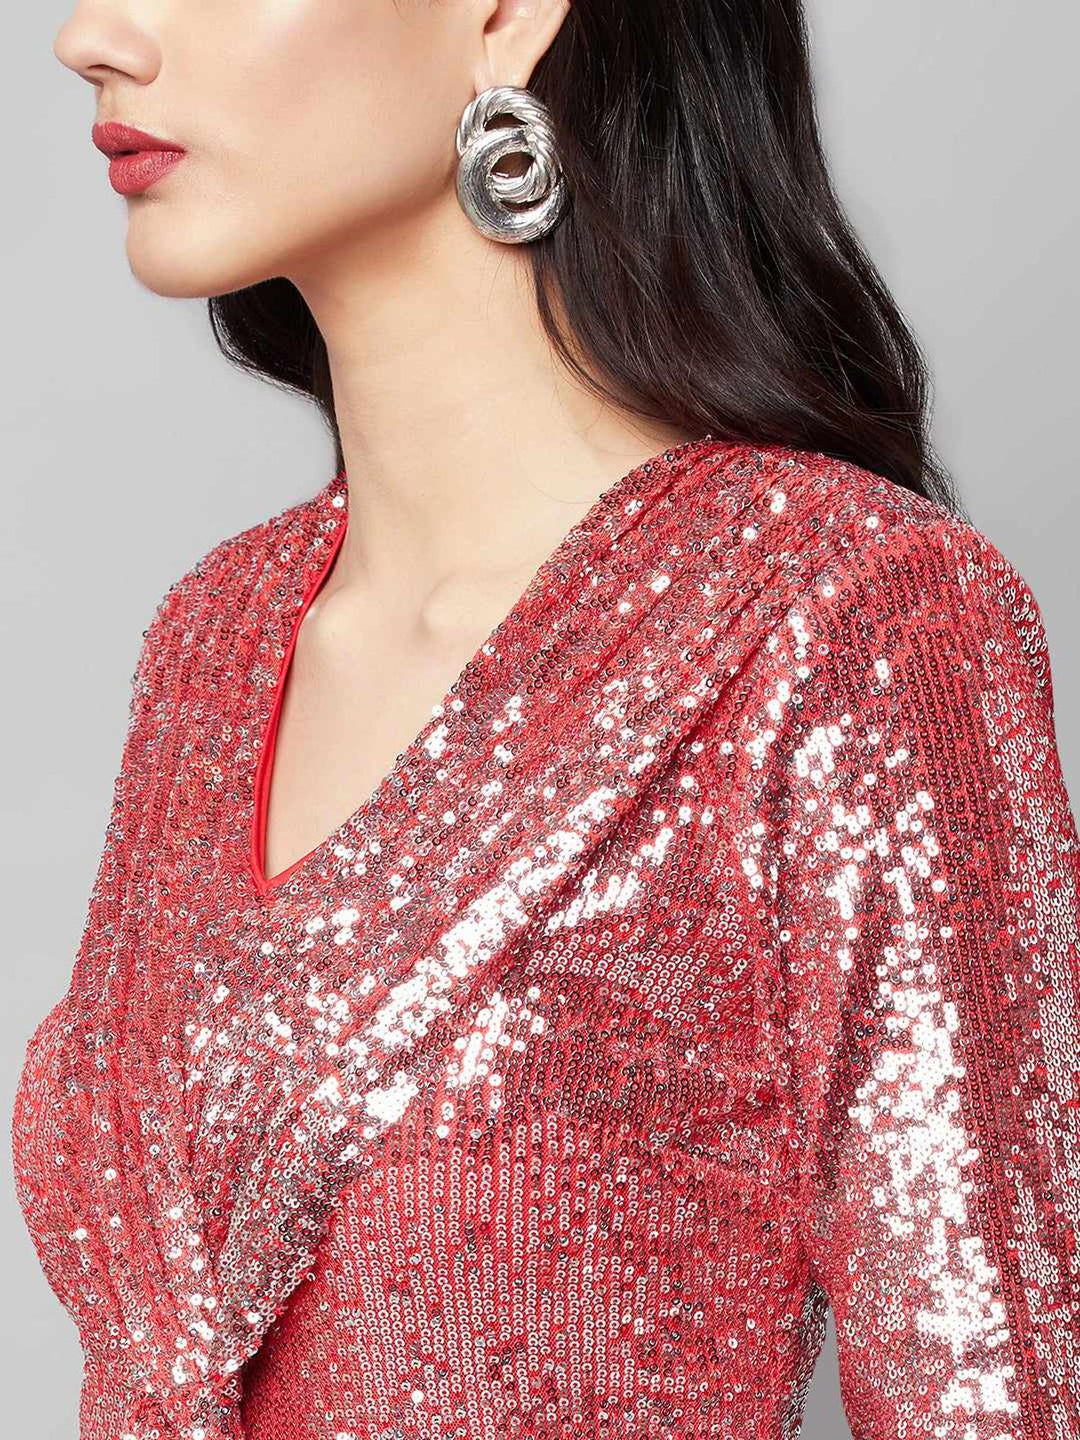 shimmery nights red party dress